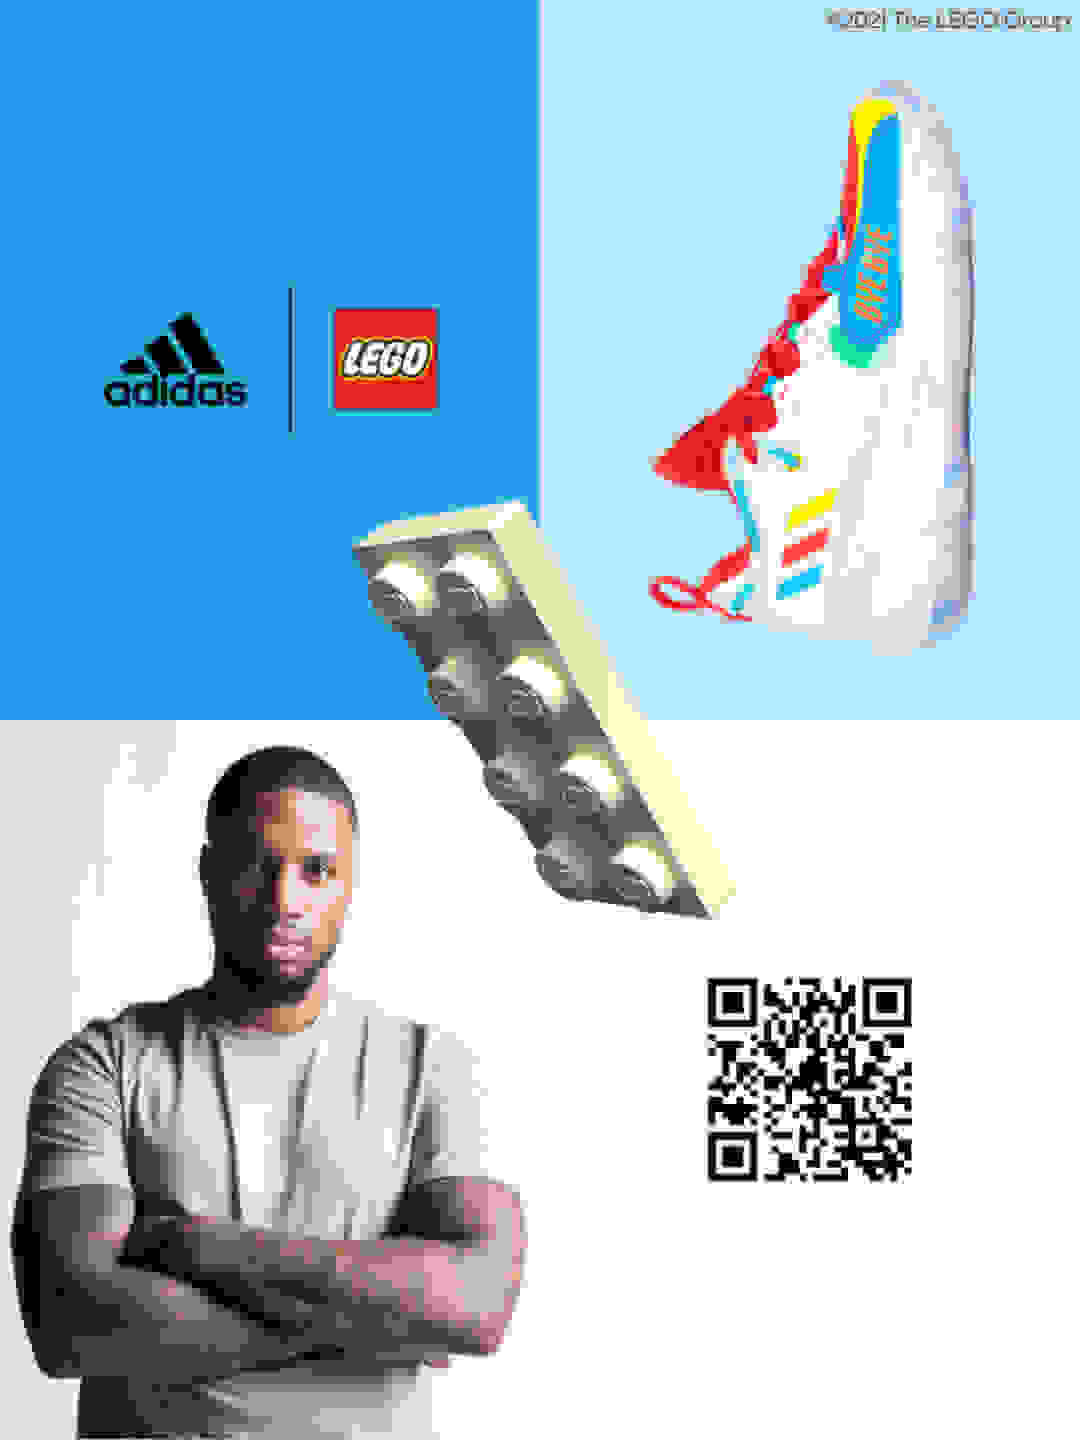 A four-quadrant grid image featuring Damian Lillard and an adidas x LEGO® sneaker from the new basketball collection.